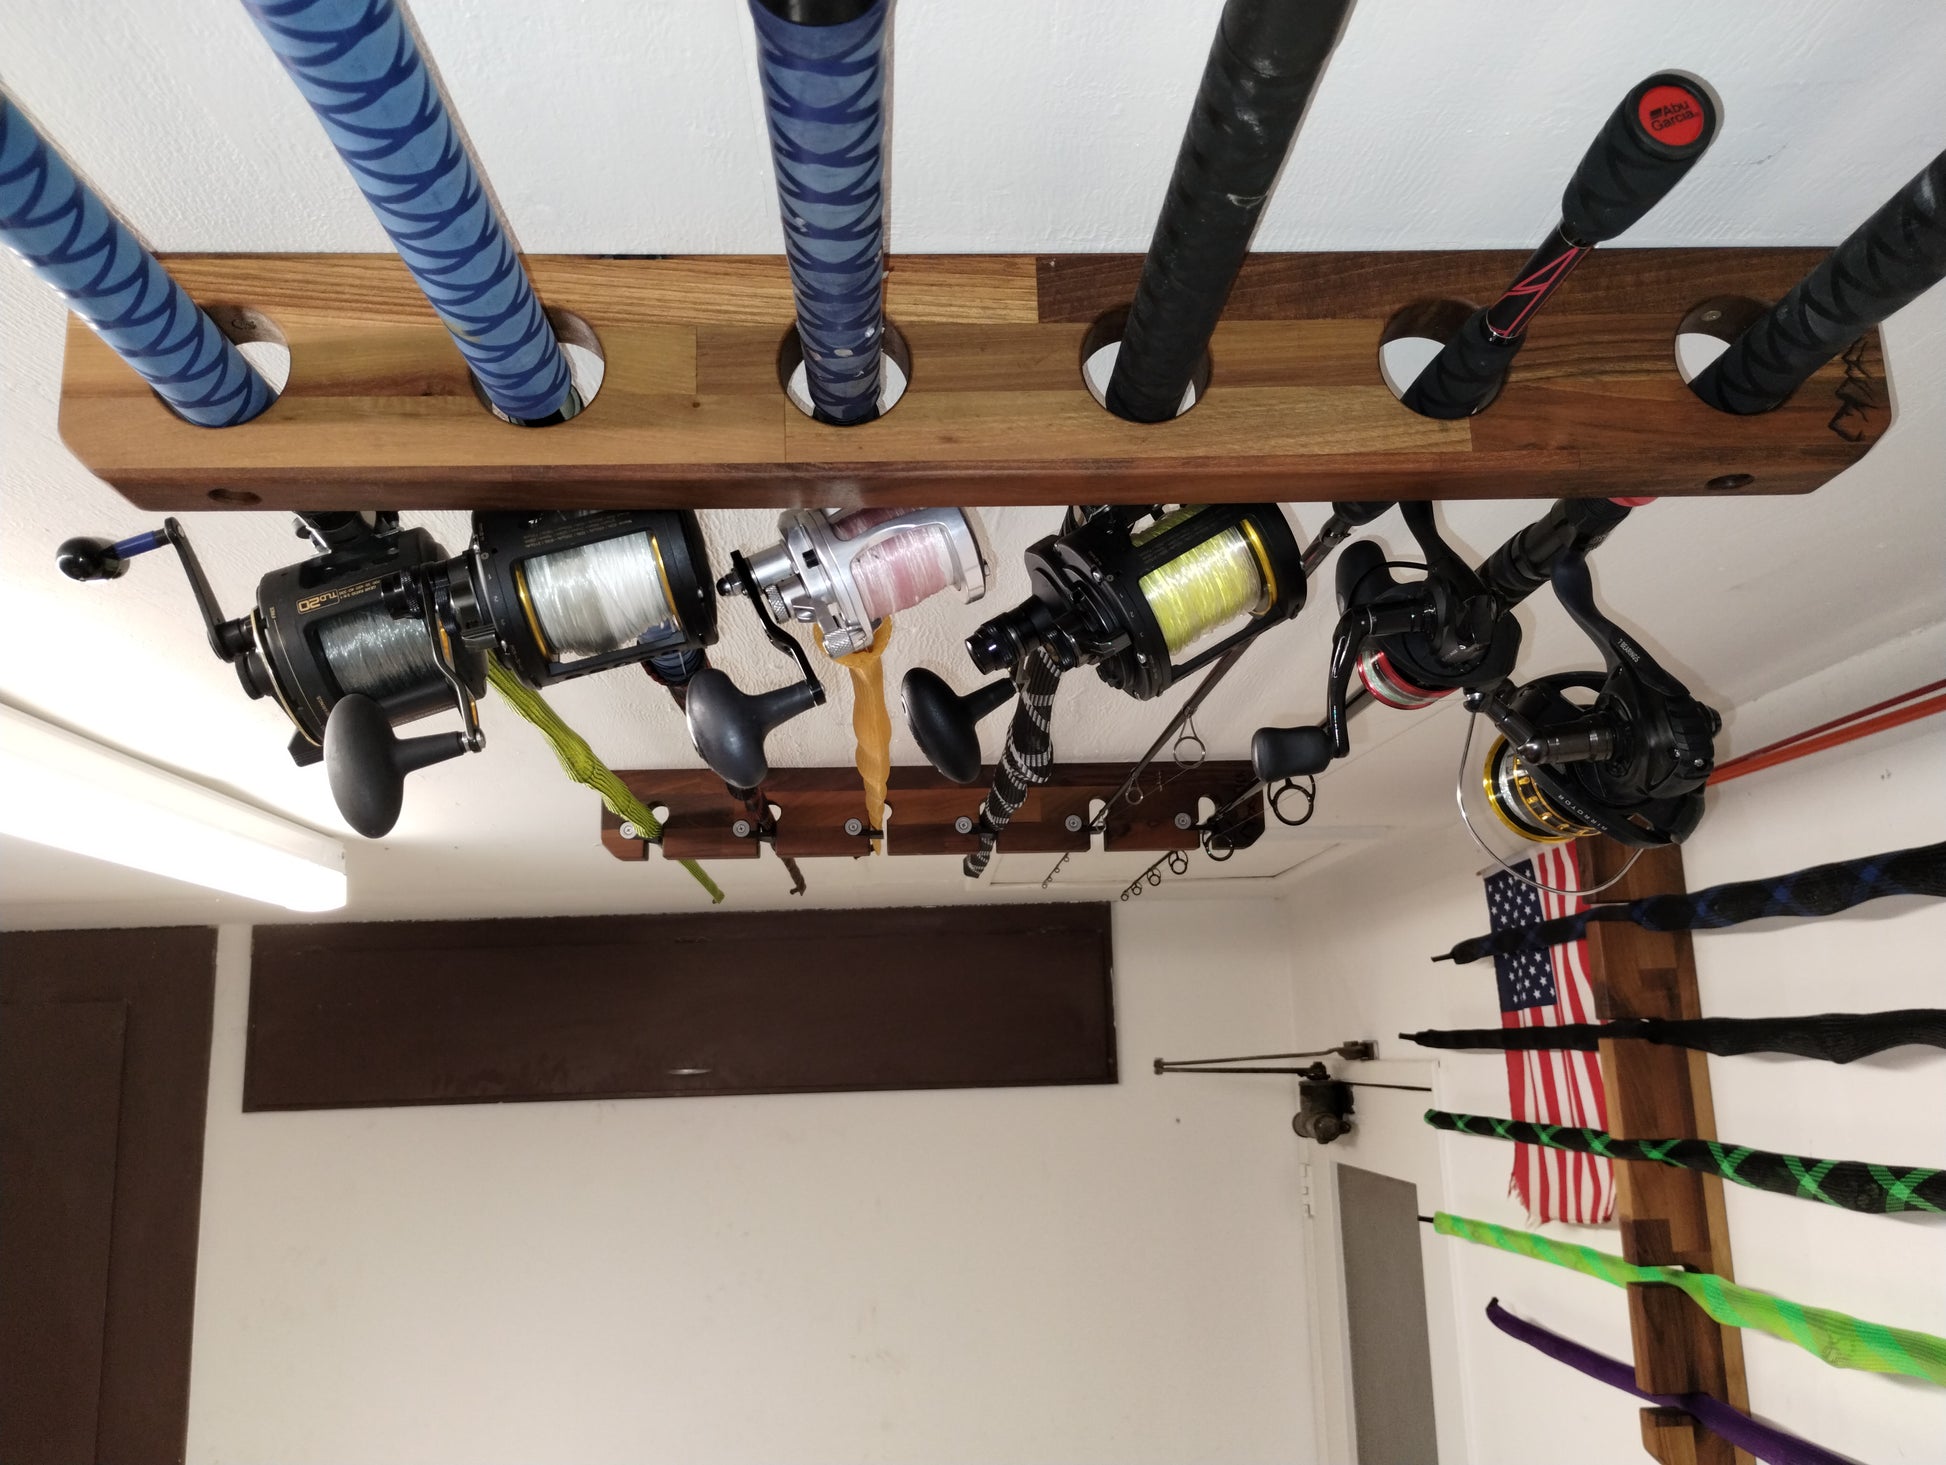 5 OFFSHORE Ceiling or Wall Rack Holder Fishing Rods Pole Reel